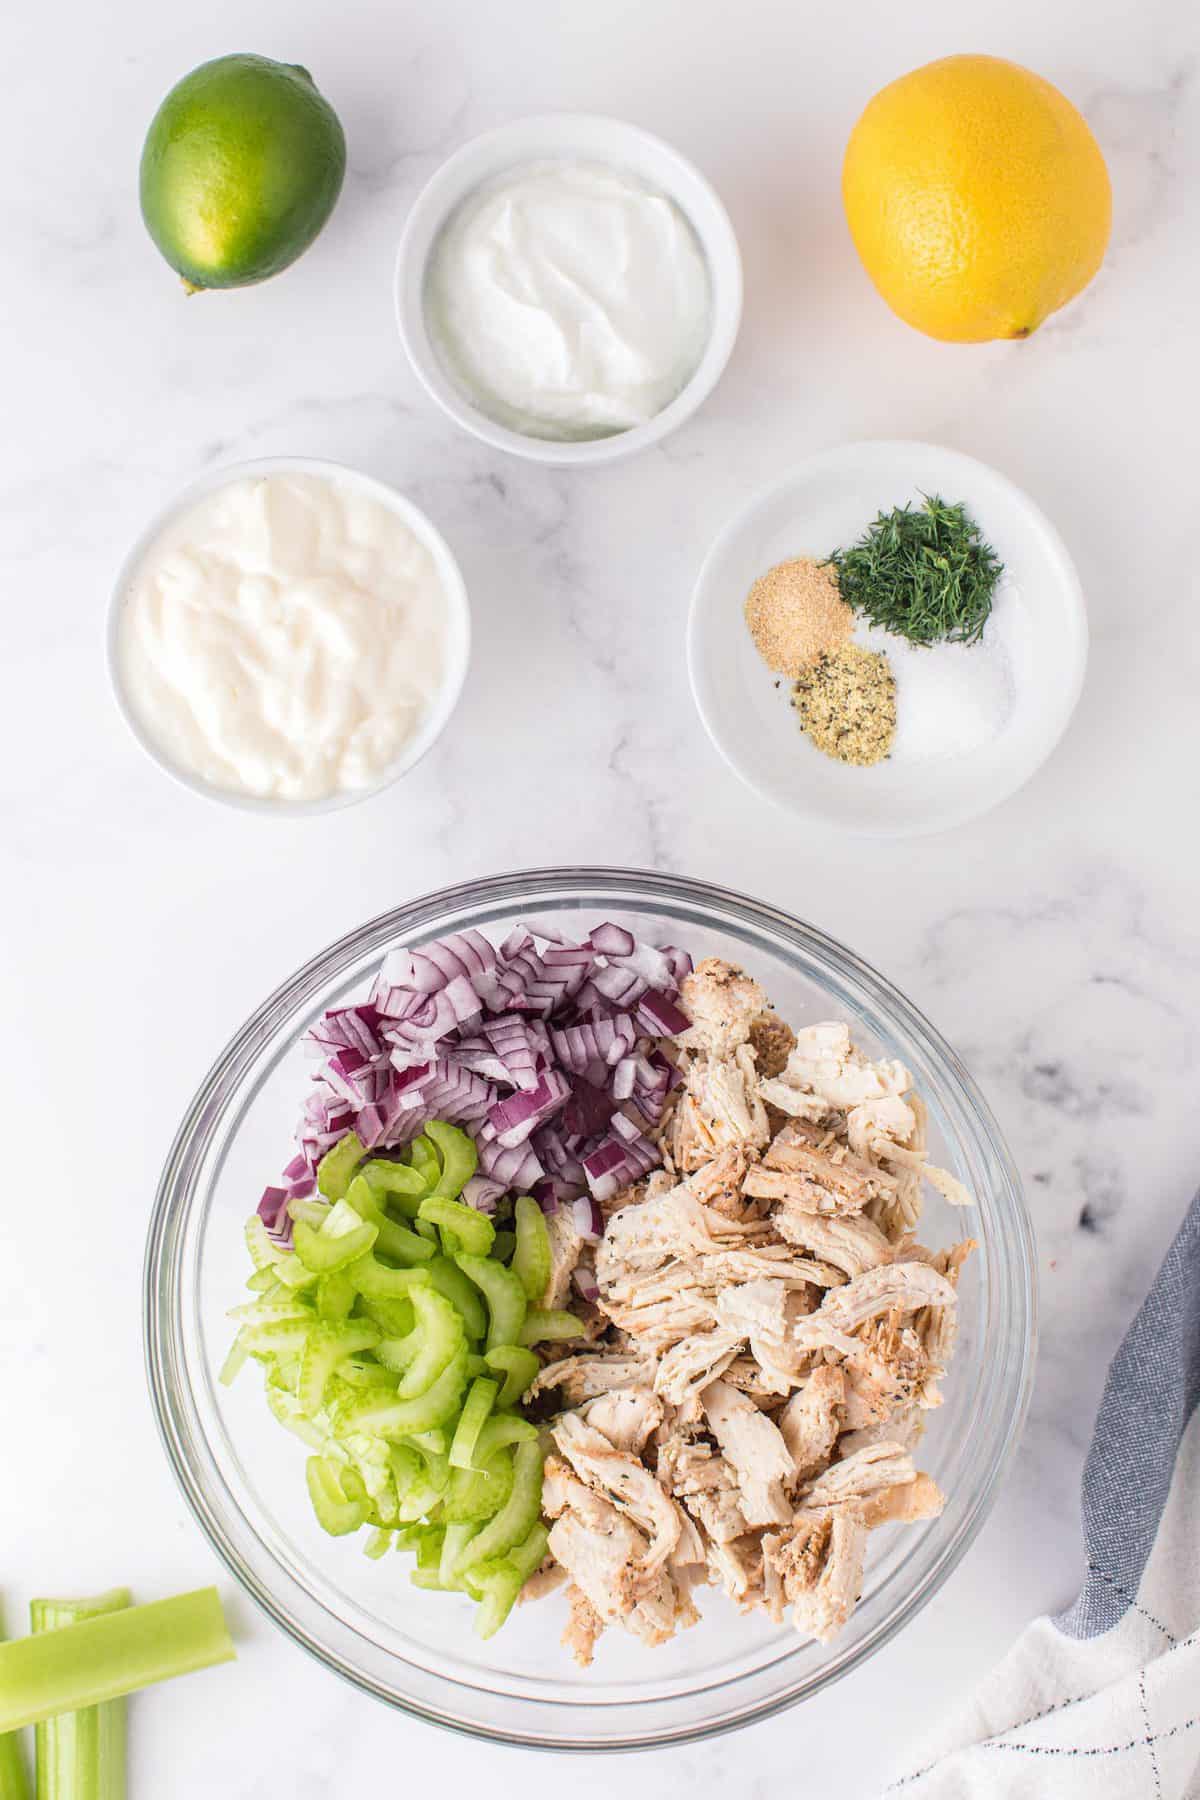 Place shredded chicken, chopped red onion and celery in a large bowl.